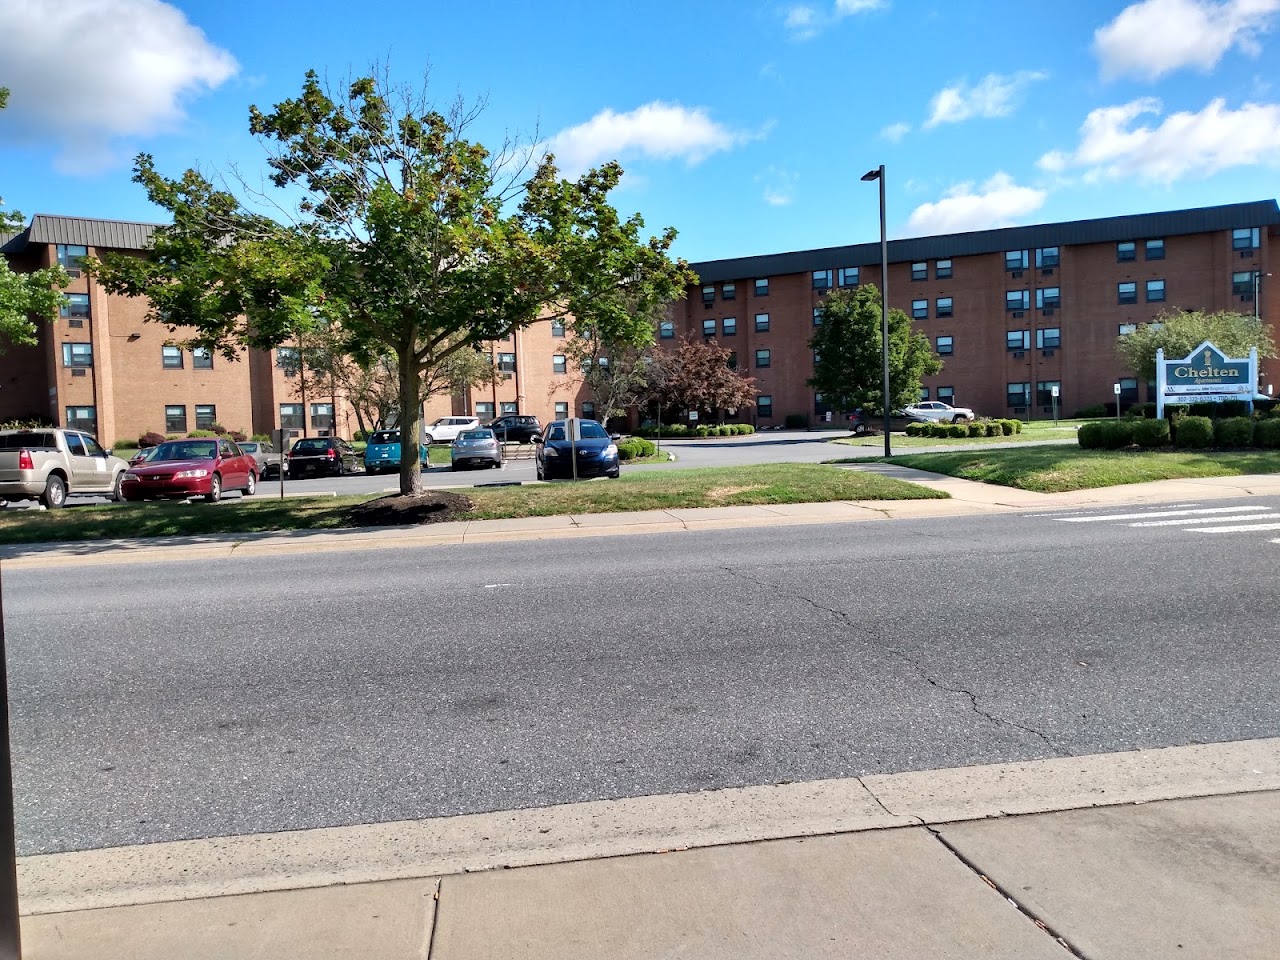 Photo of CHELTEN APARTMENTS. Affordable housing located at 431 OLD FORGE ROAD NEW CASTLE, DE 19720